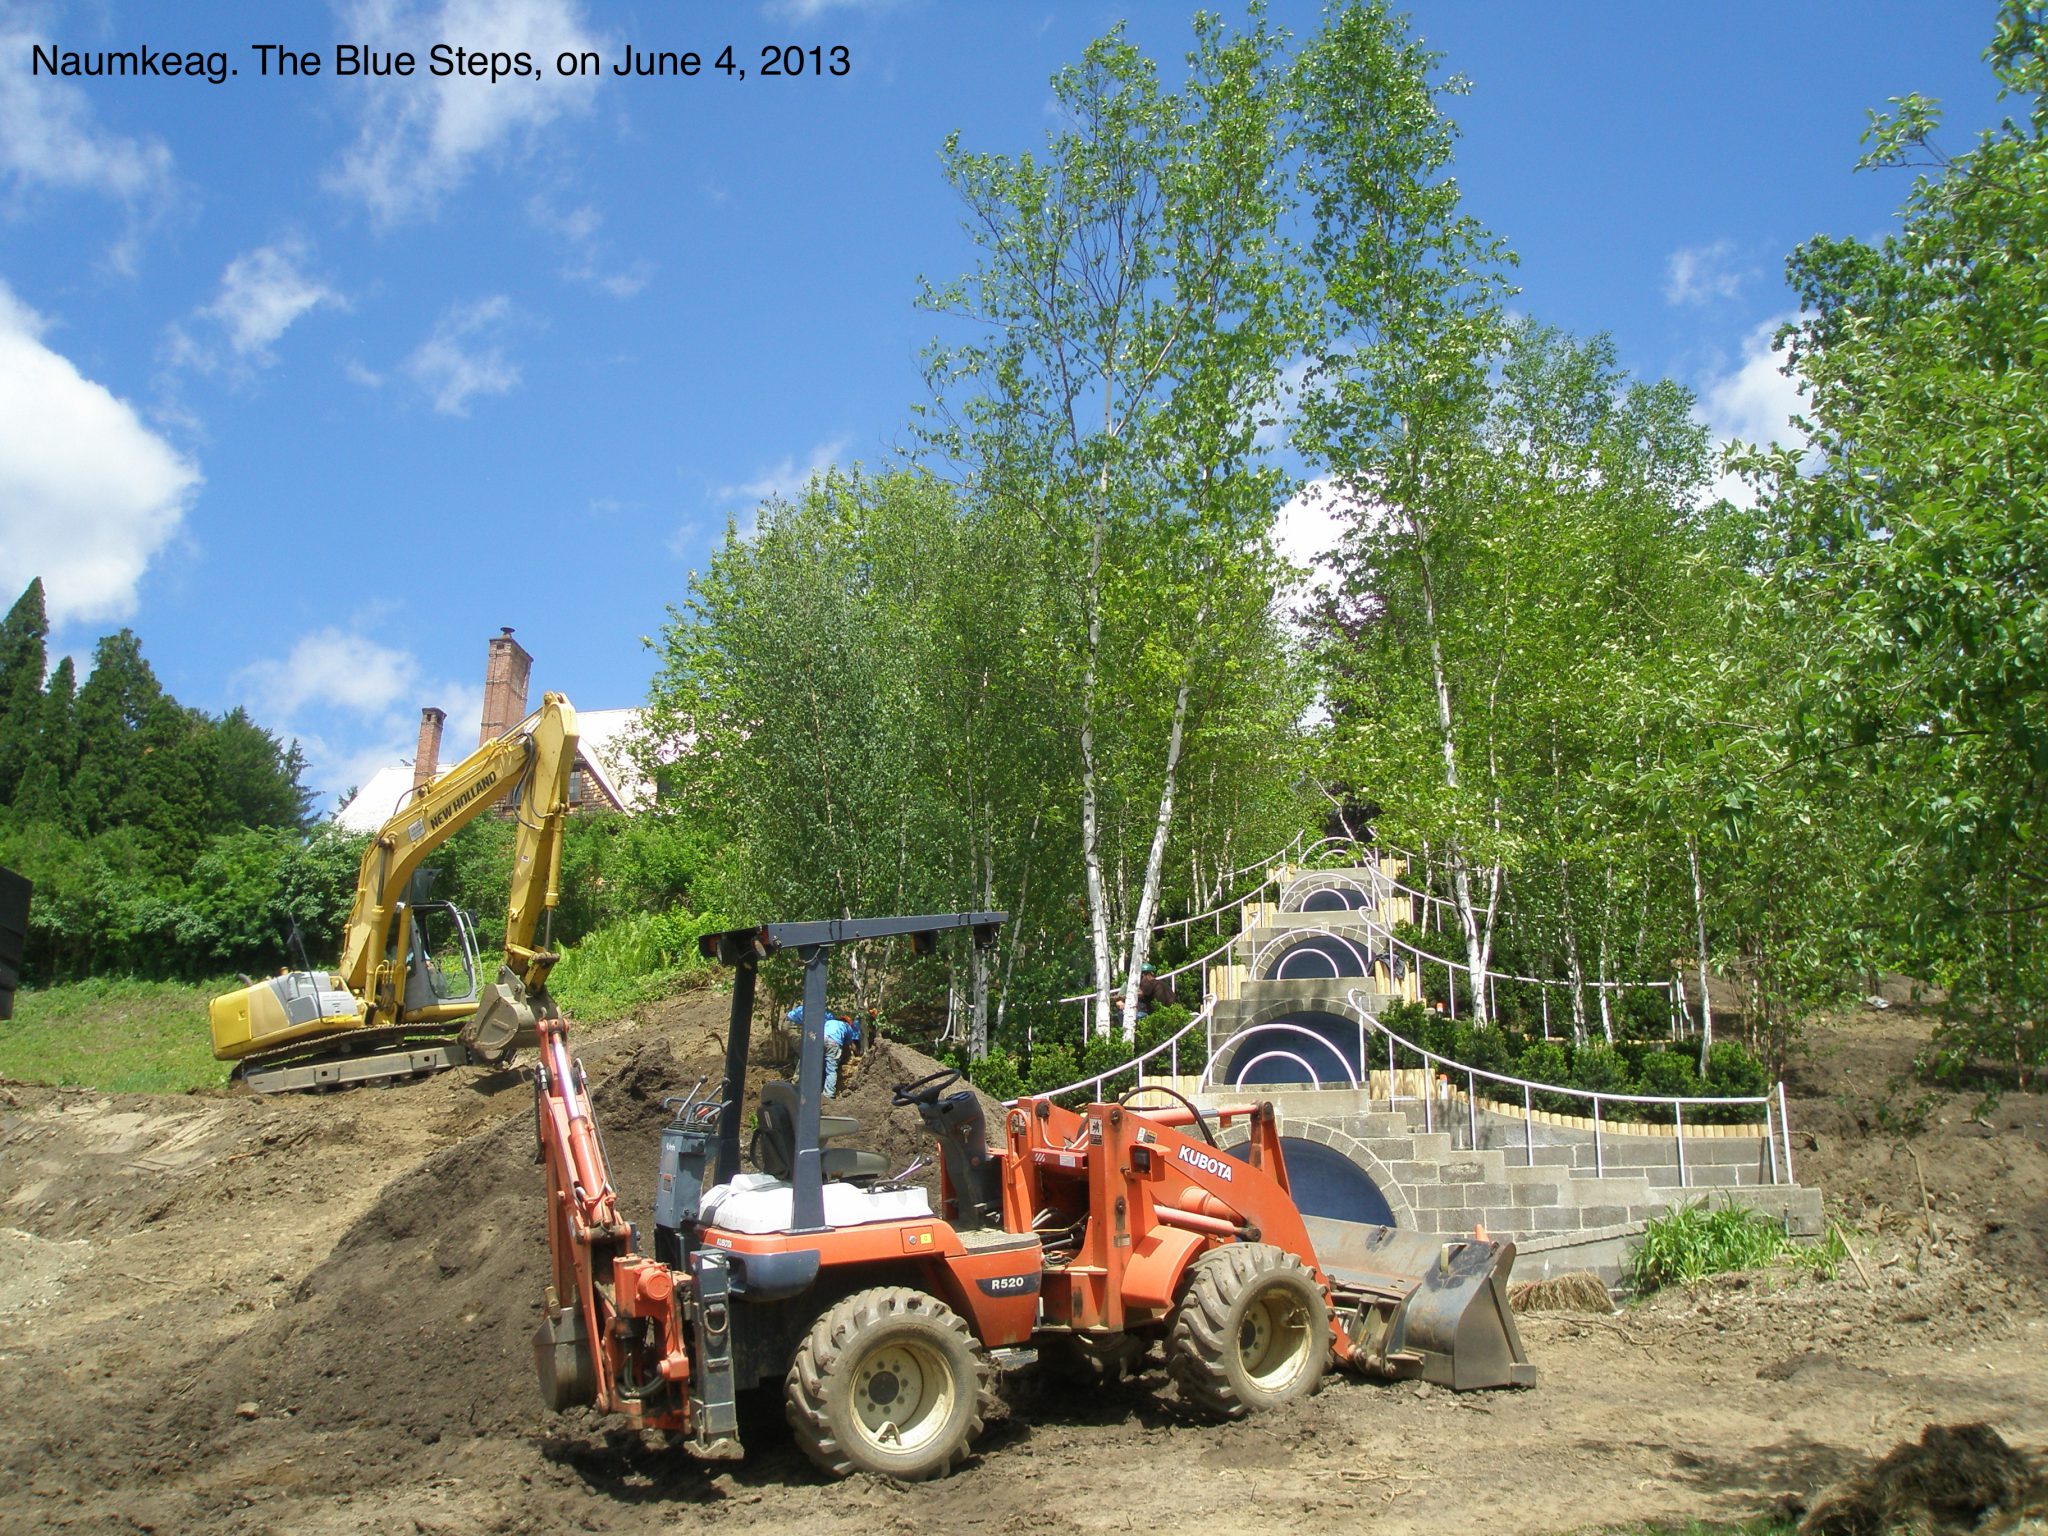 In June of 2013, the Blue Steps were being totally rebuilt, while an entirely new grove of birch trees was being planted.